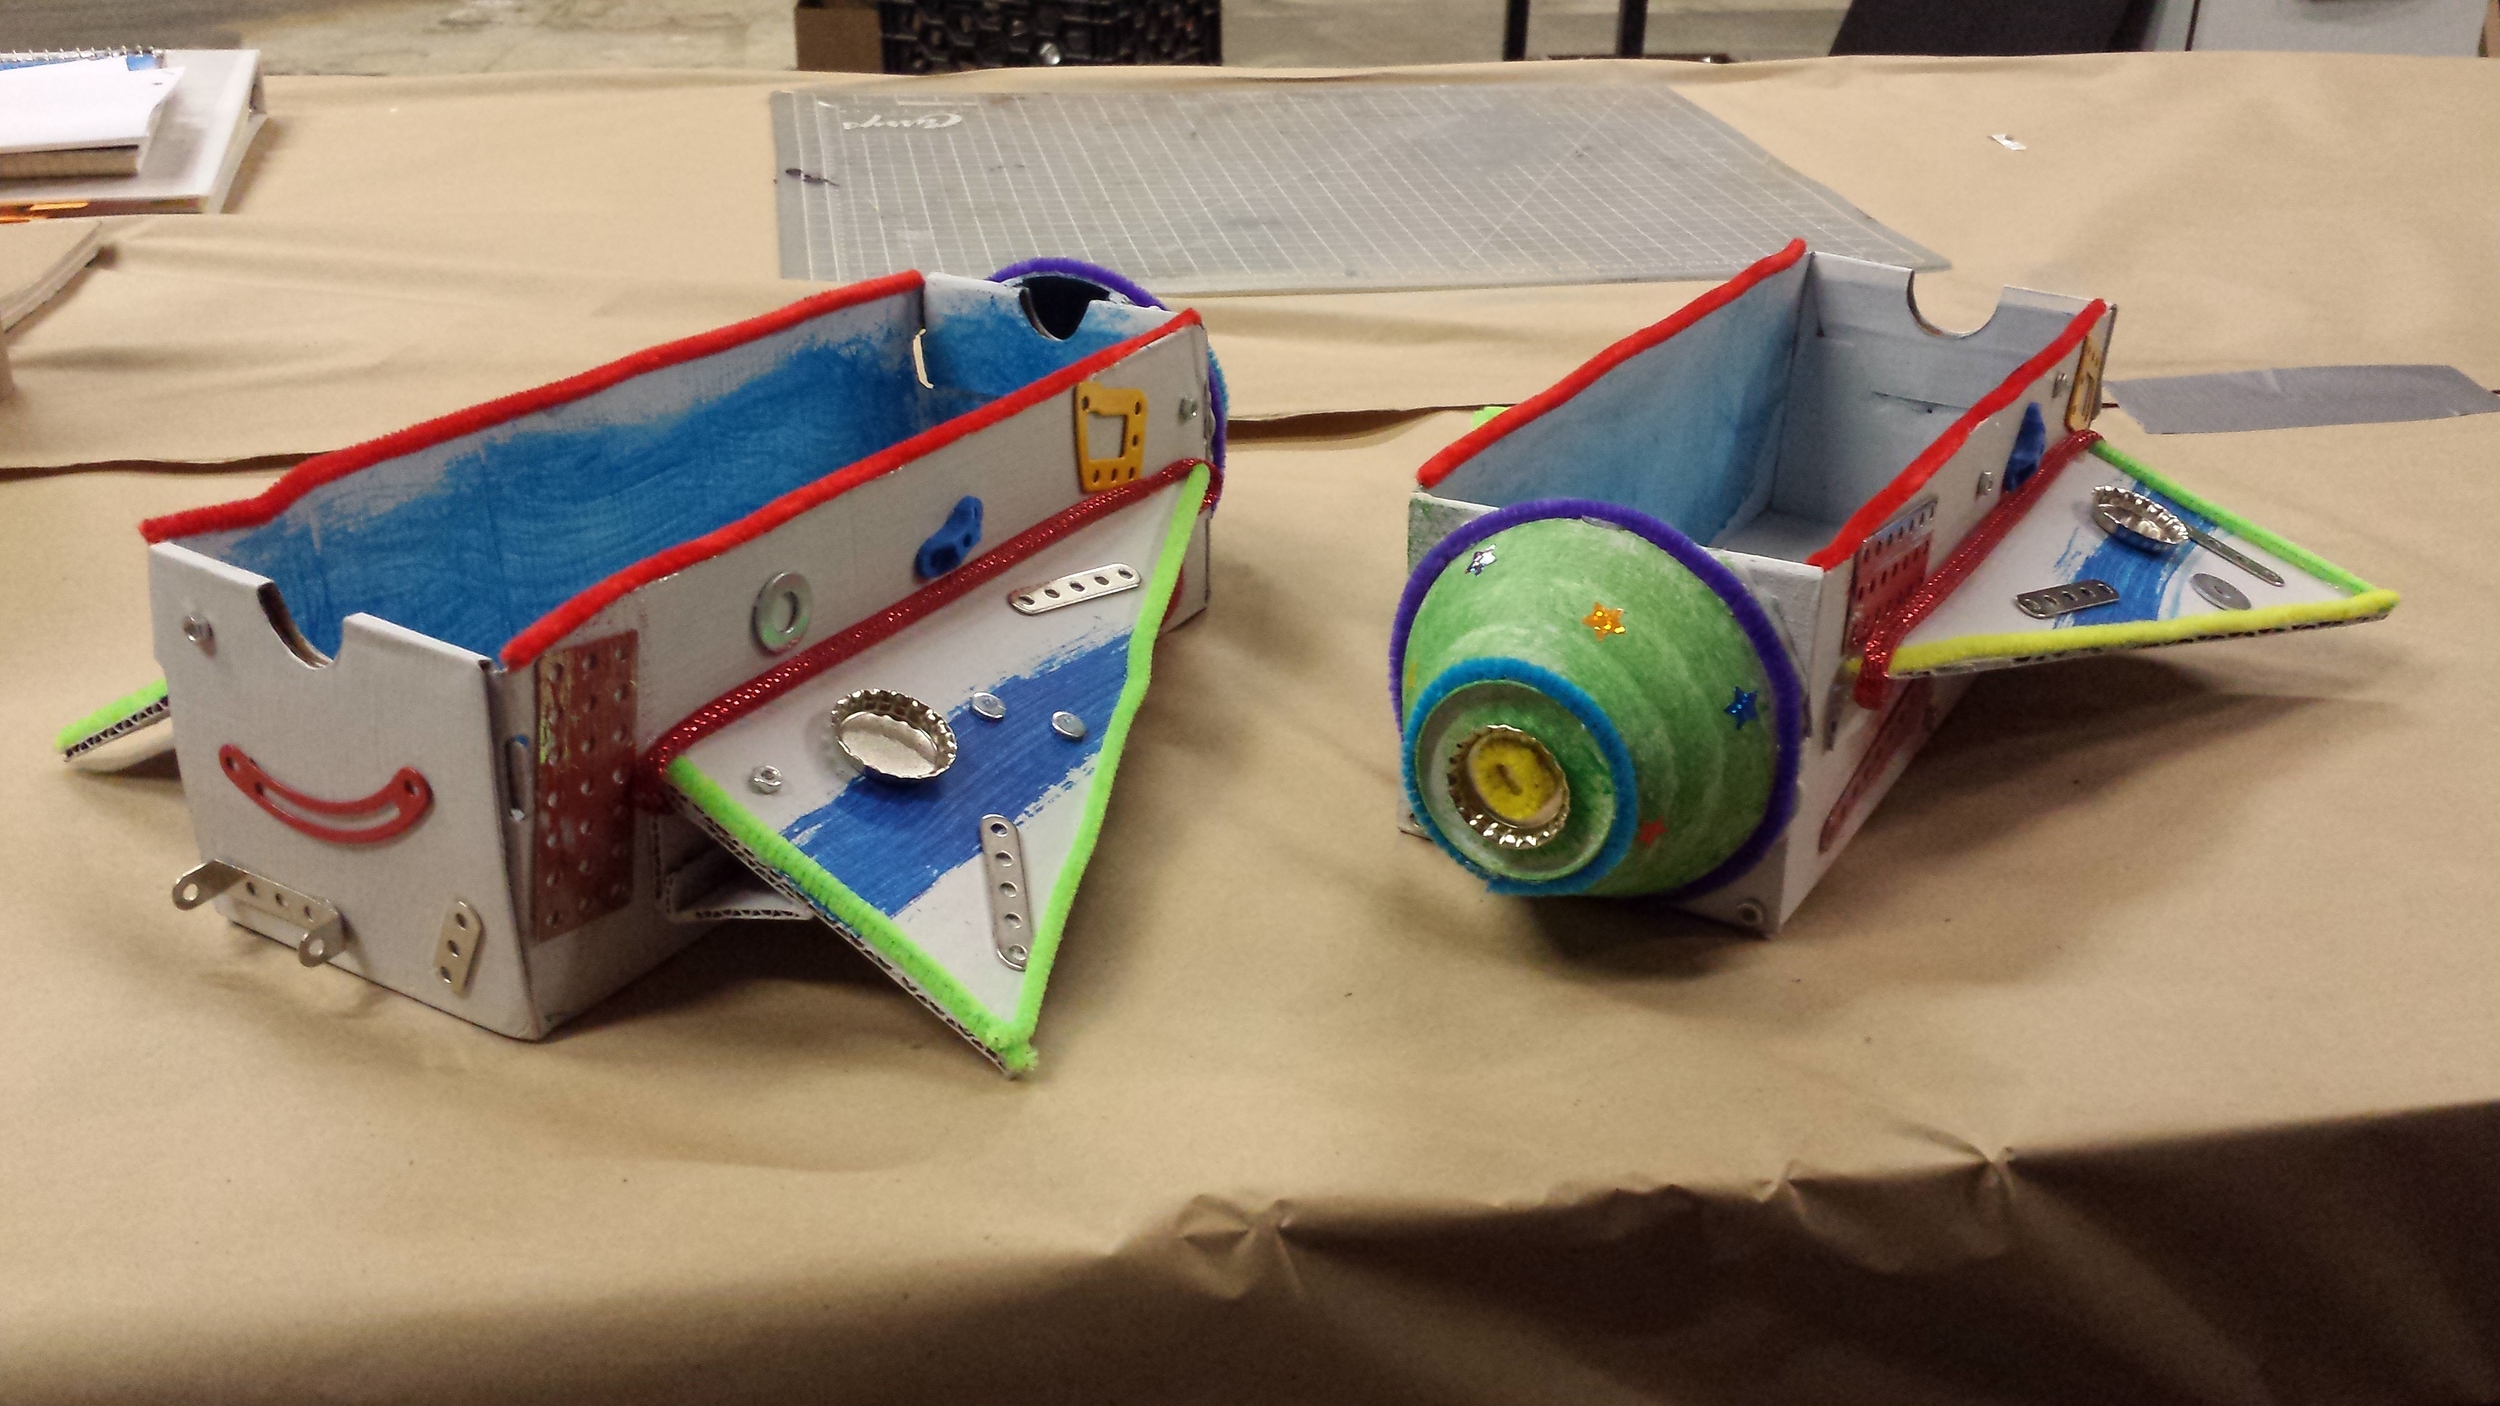  Rocket ship for puppet to appear made by child. (Playdate 2015) 